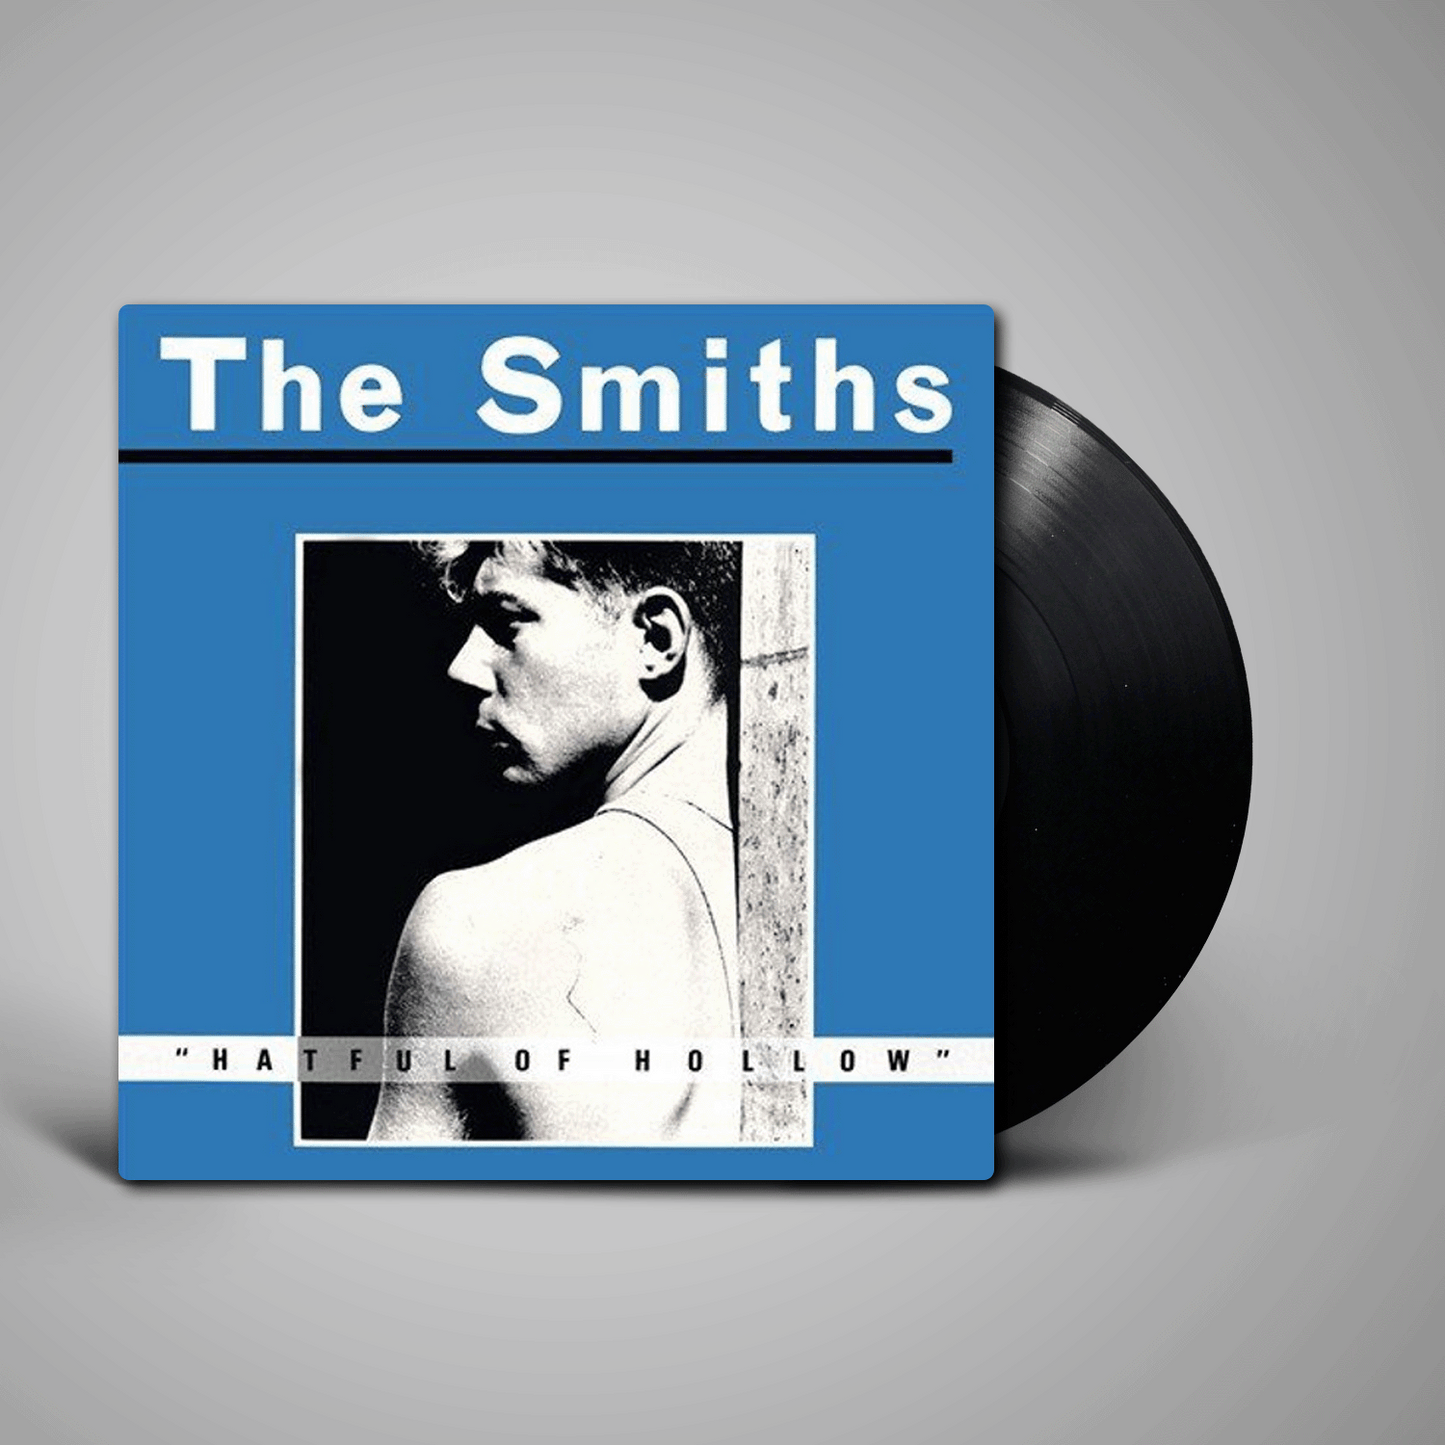 Smiths, The - Hateful of Hollow